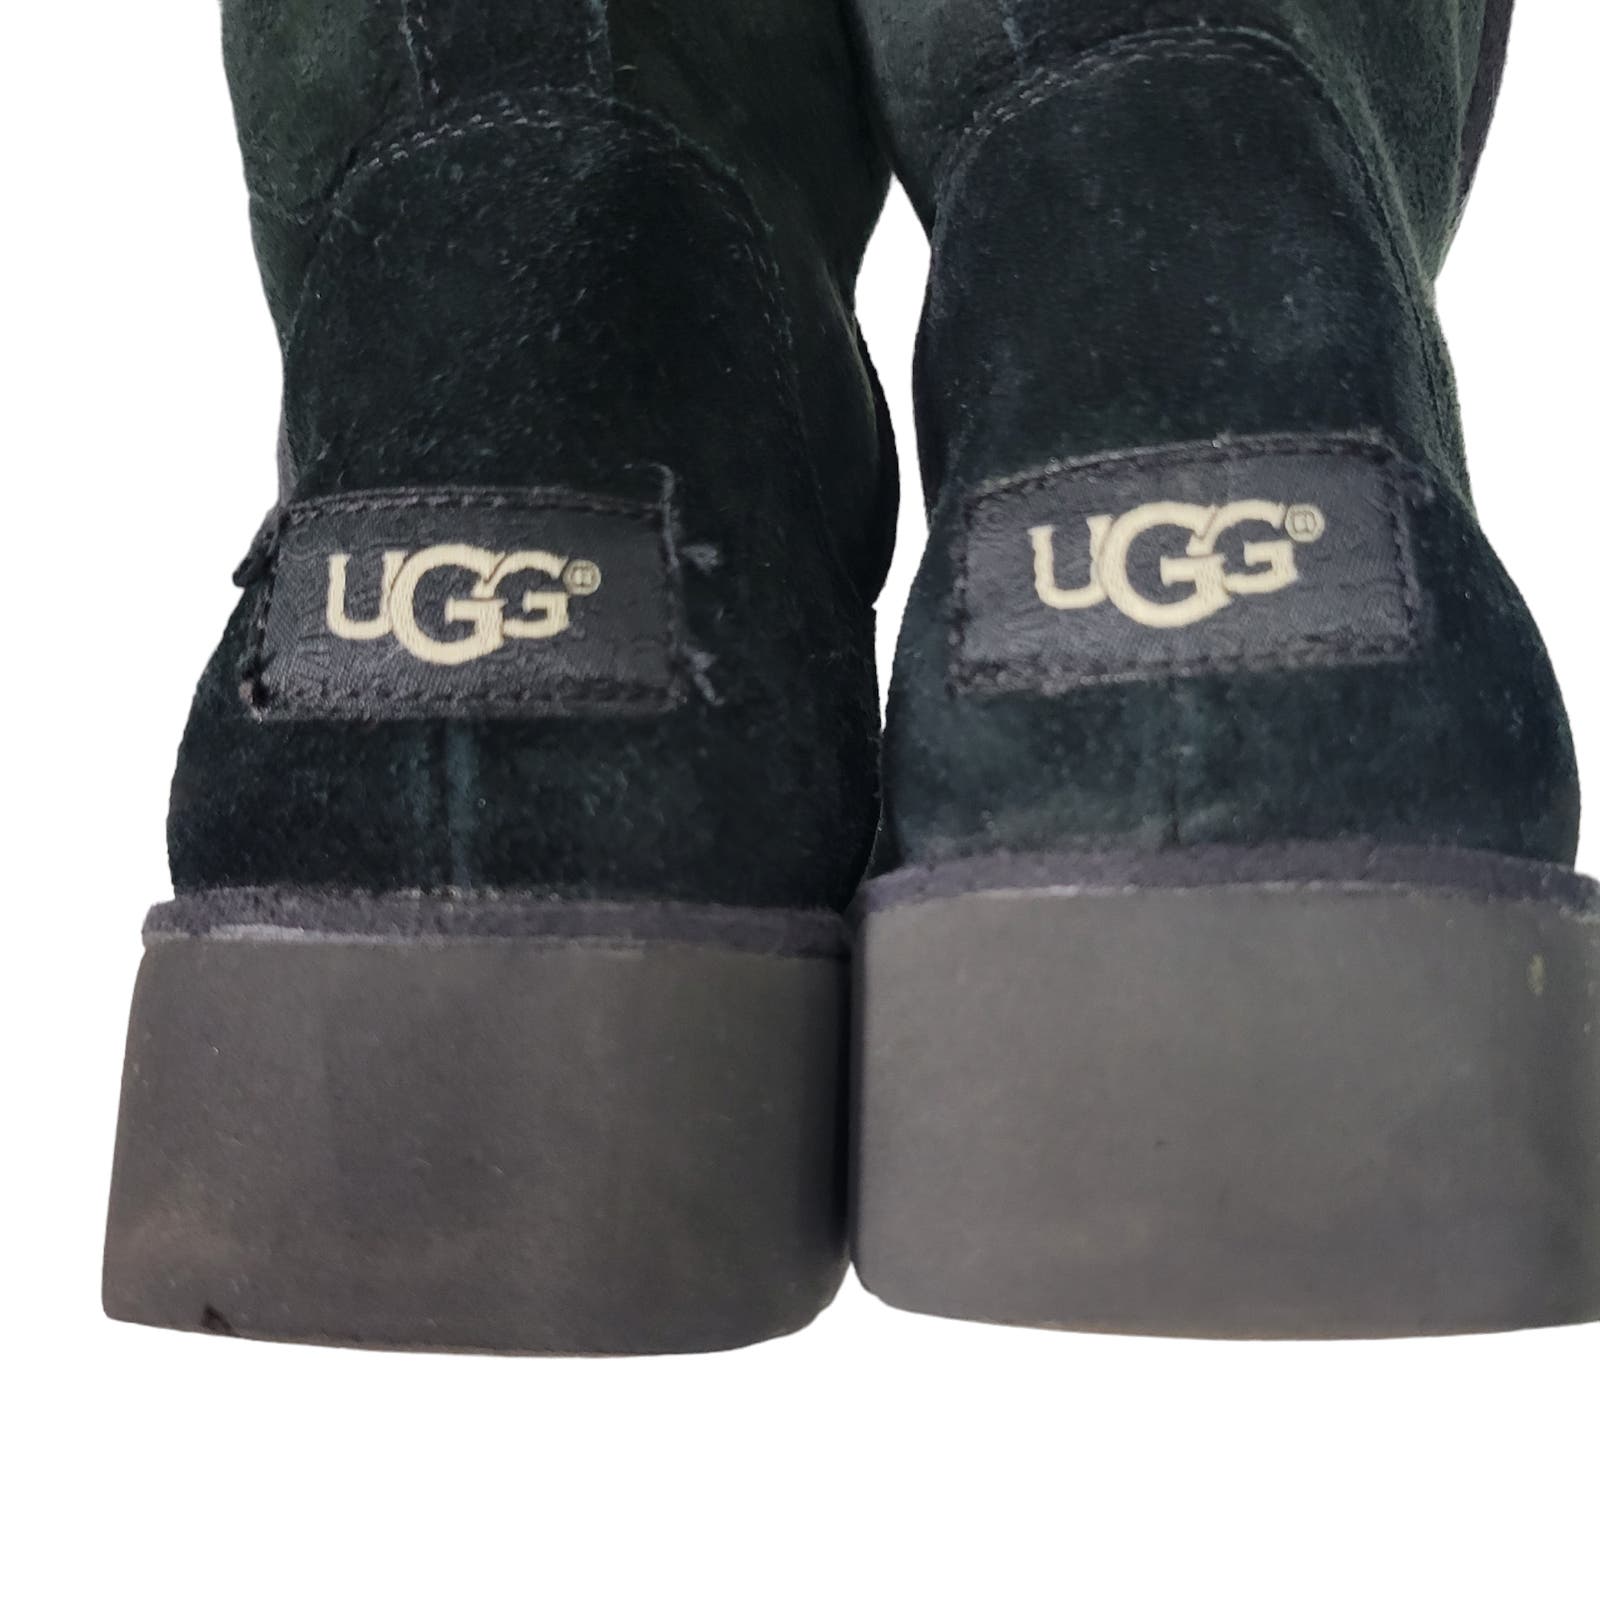 UGG Aimie Boots Black Wedge Heel Shearling Suede Sheepskin Fur Comfort Pull On Size 8